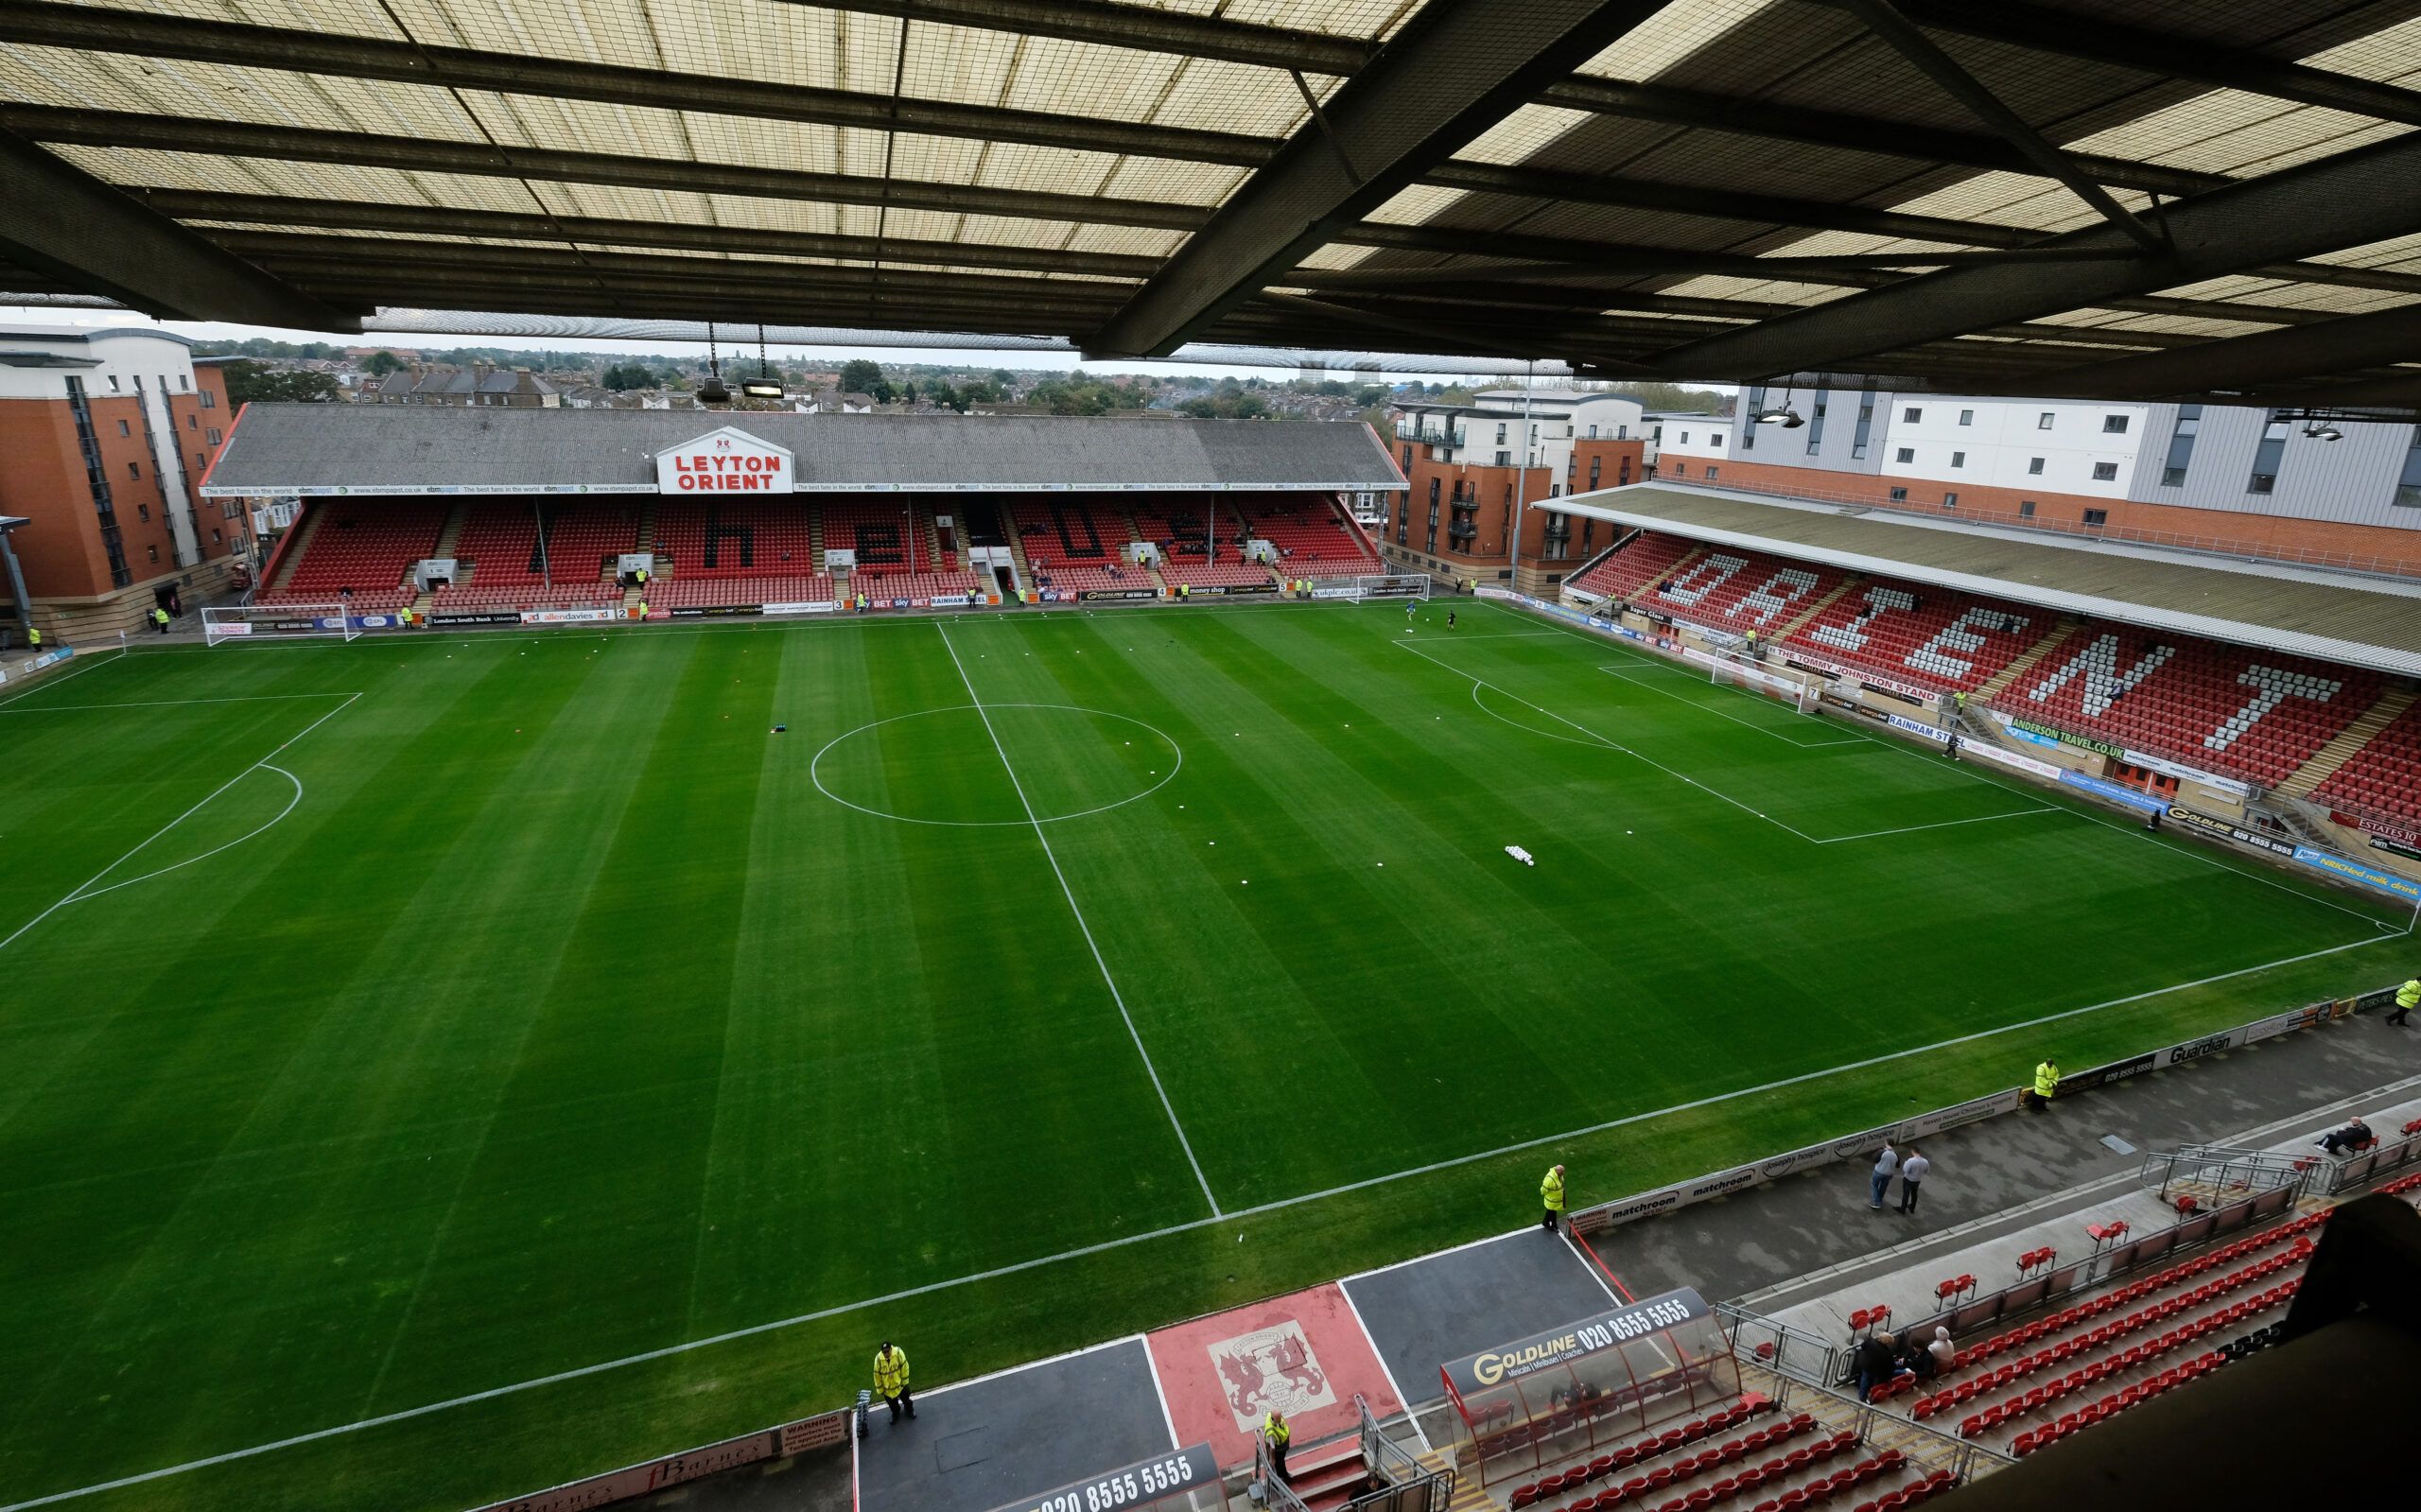 Football Soccer Britain - Leyton Orient v Portsmouth - Sky Bet League Two - The Matchroom Stadium, Brisbane Road - 16/17 - 8/10/16
General view inside the stadium before the match 
Mandatory Credit: Action Images / Alan Walter

EDITORIAL USE ONLY.